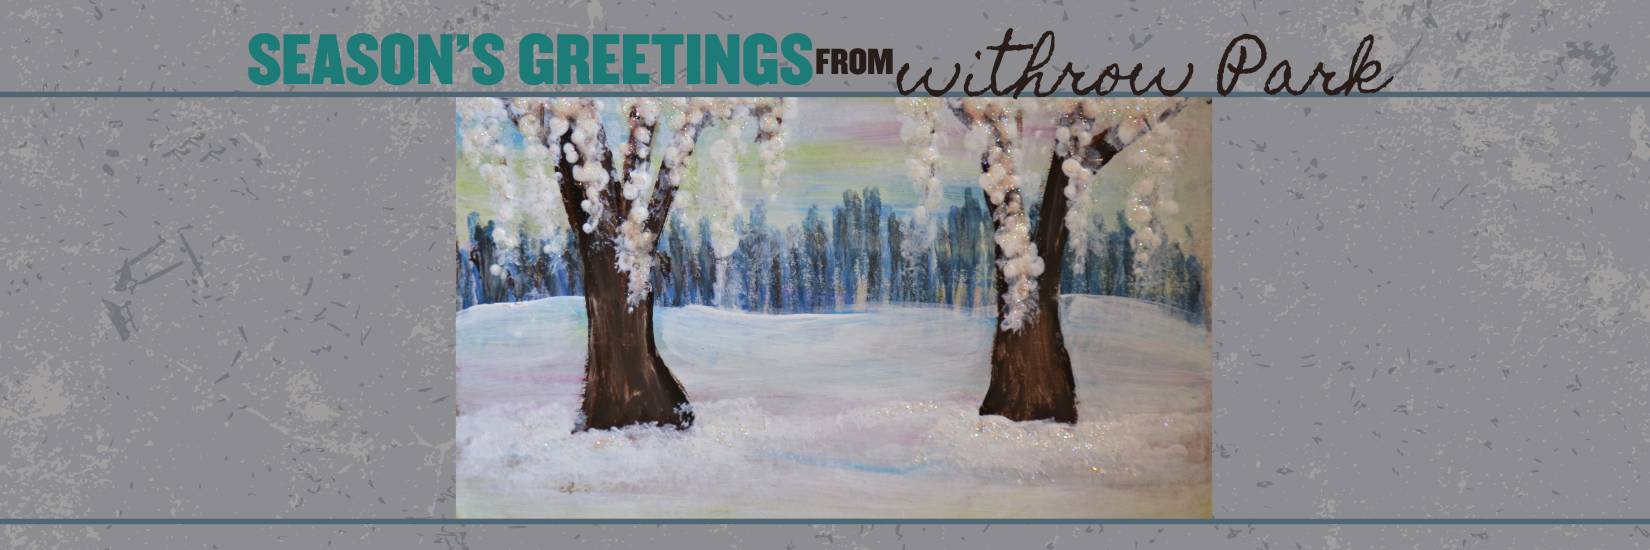 Two snowy trees in a park shimmering with bright pink and blue shadow. There is teal and brown writing against a brown background. Season's greetings from Withrow Park